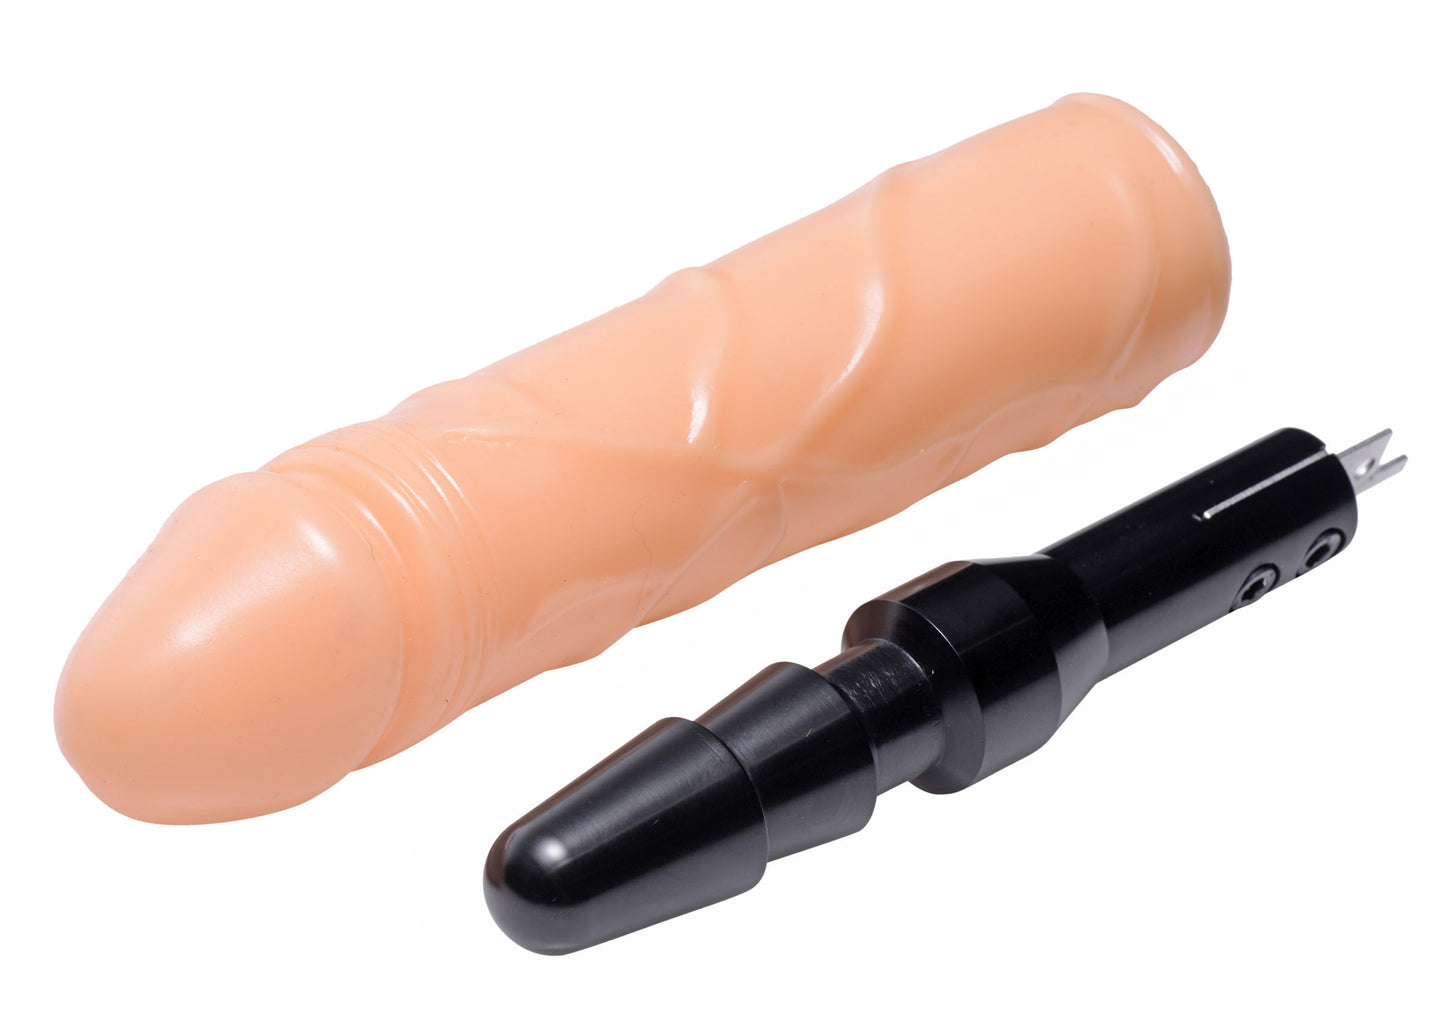 The Fucking Adapter Plus With Dildo  - Club X